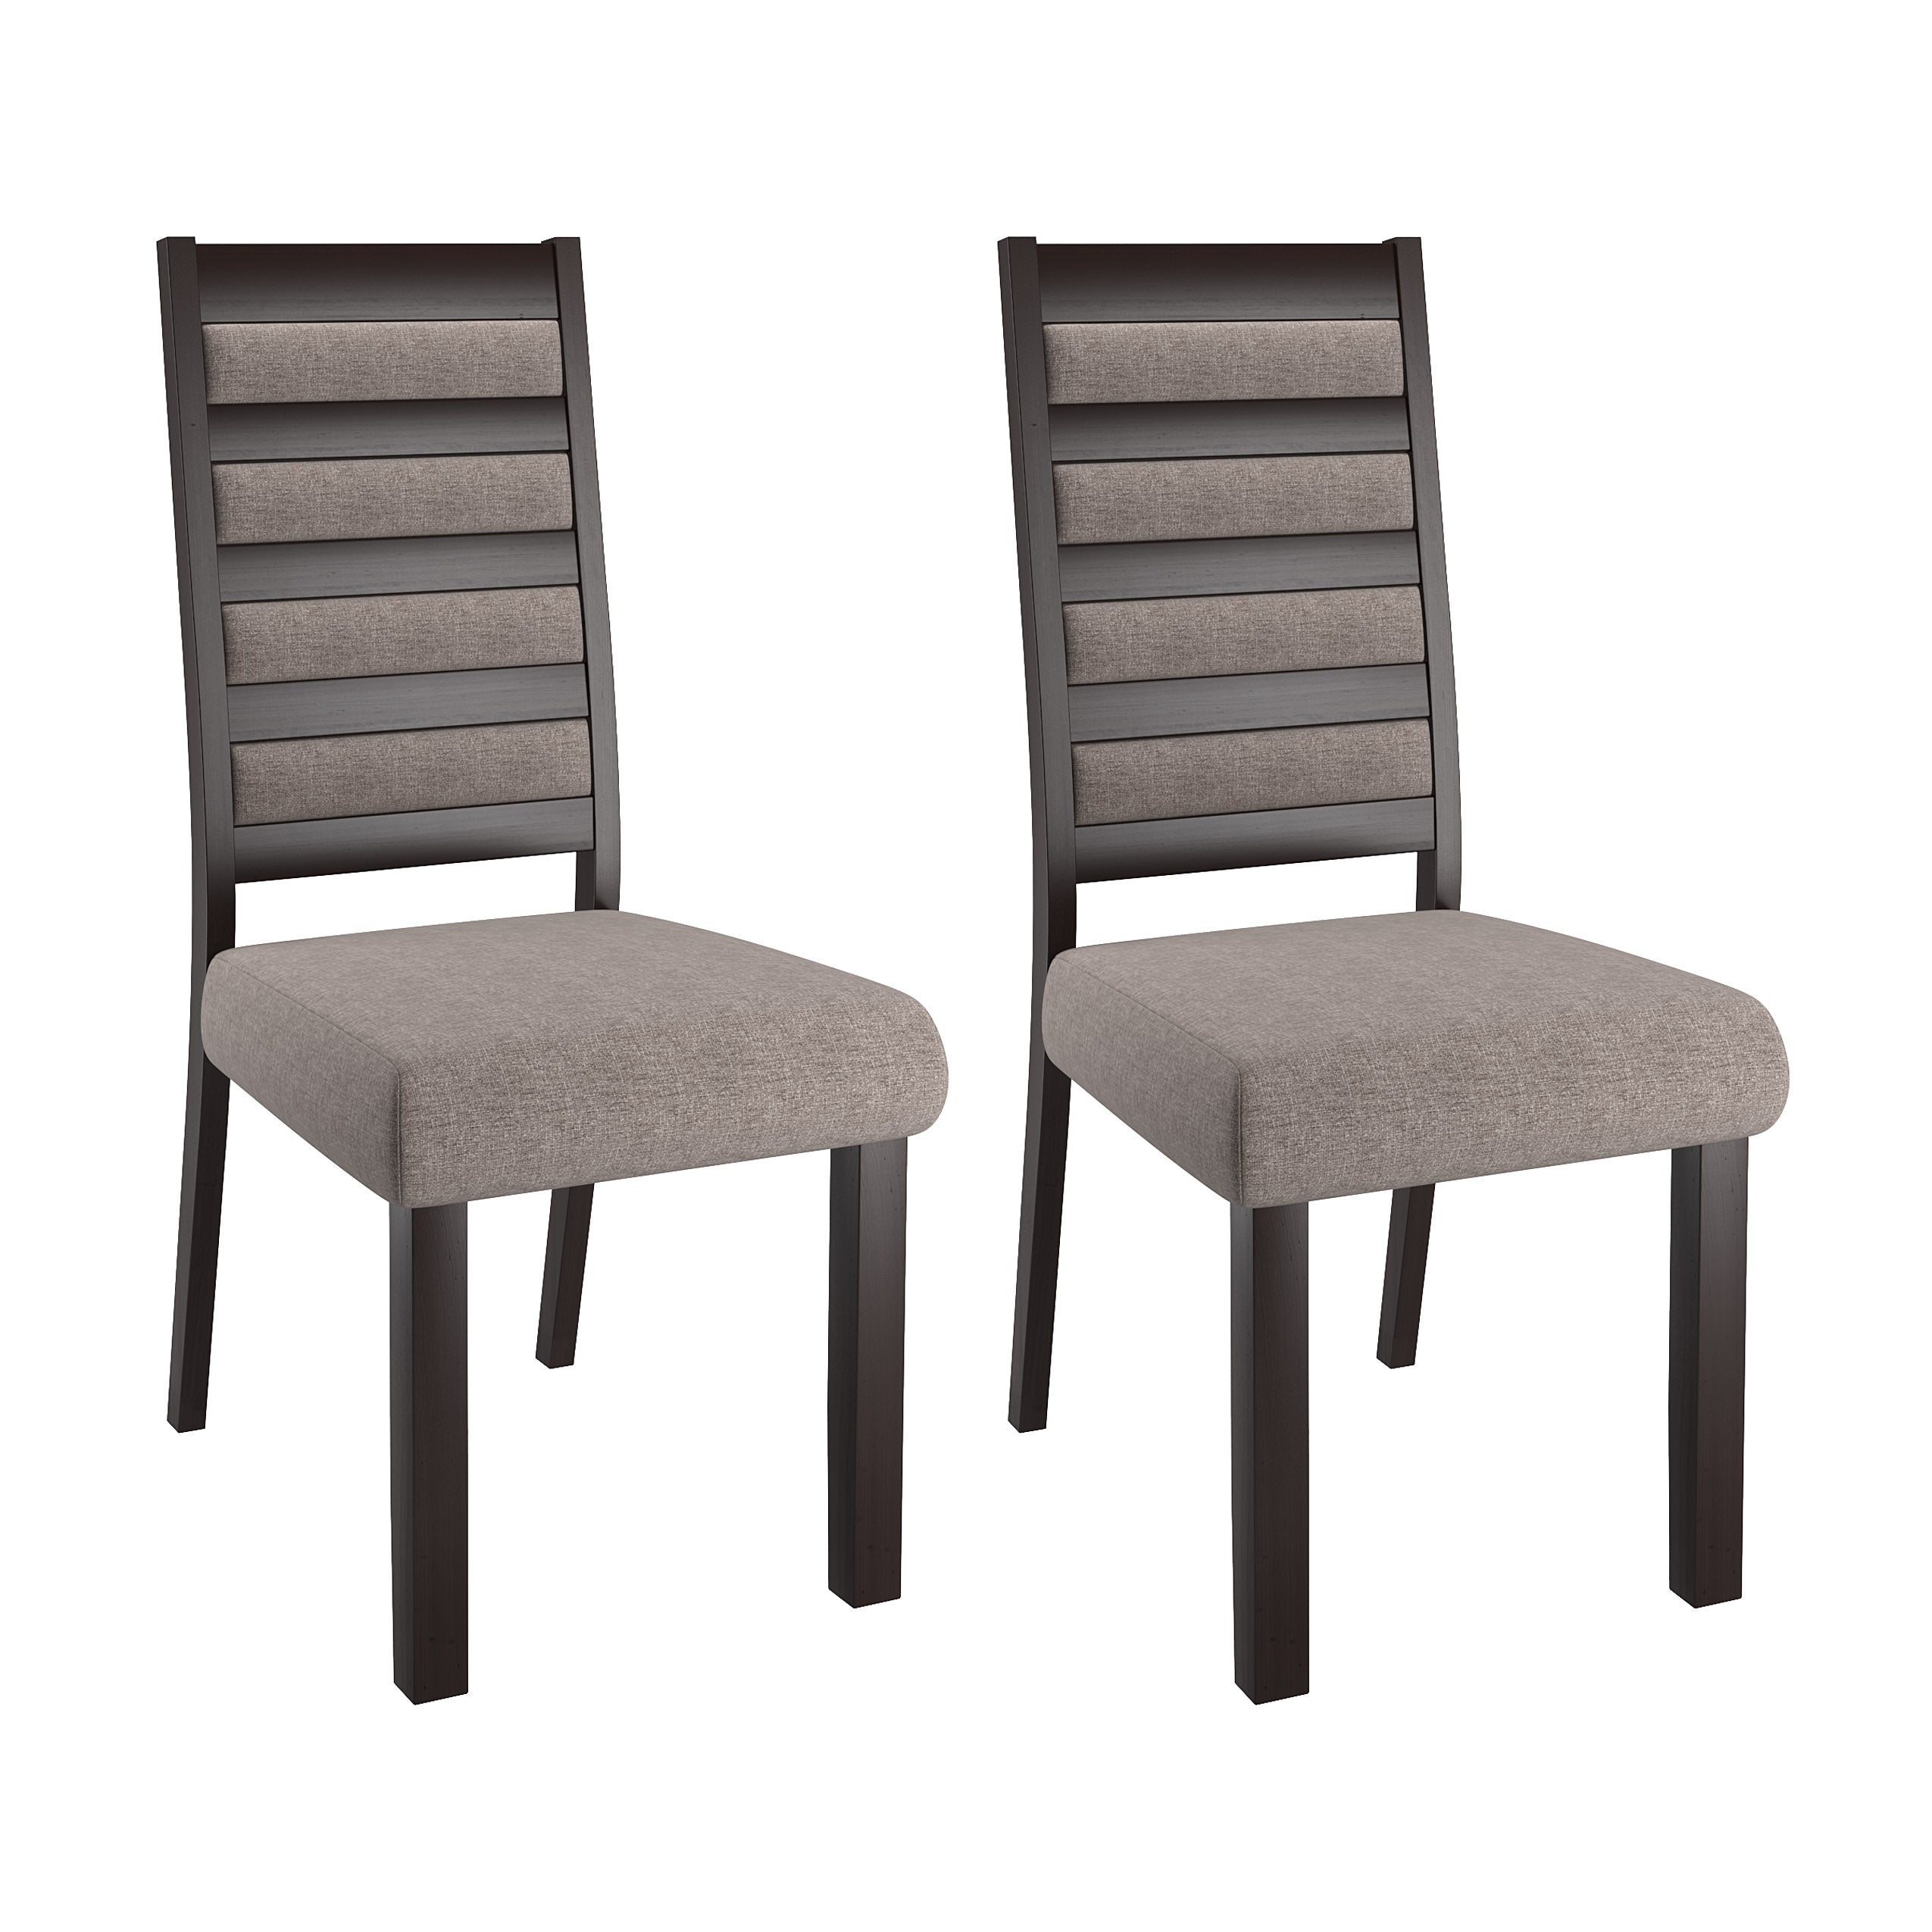 Grey Upholstered Dining Chairs, Solid Wood Legs